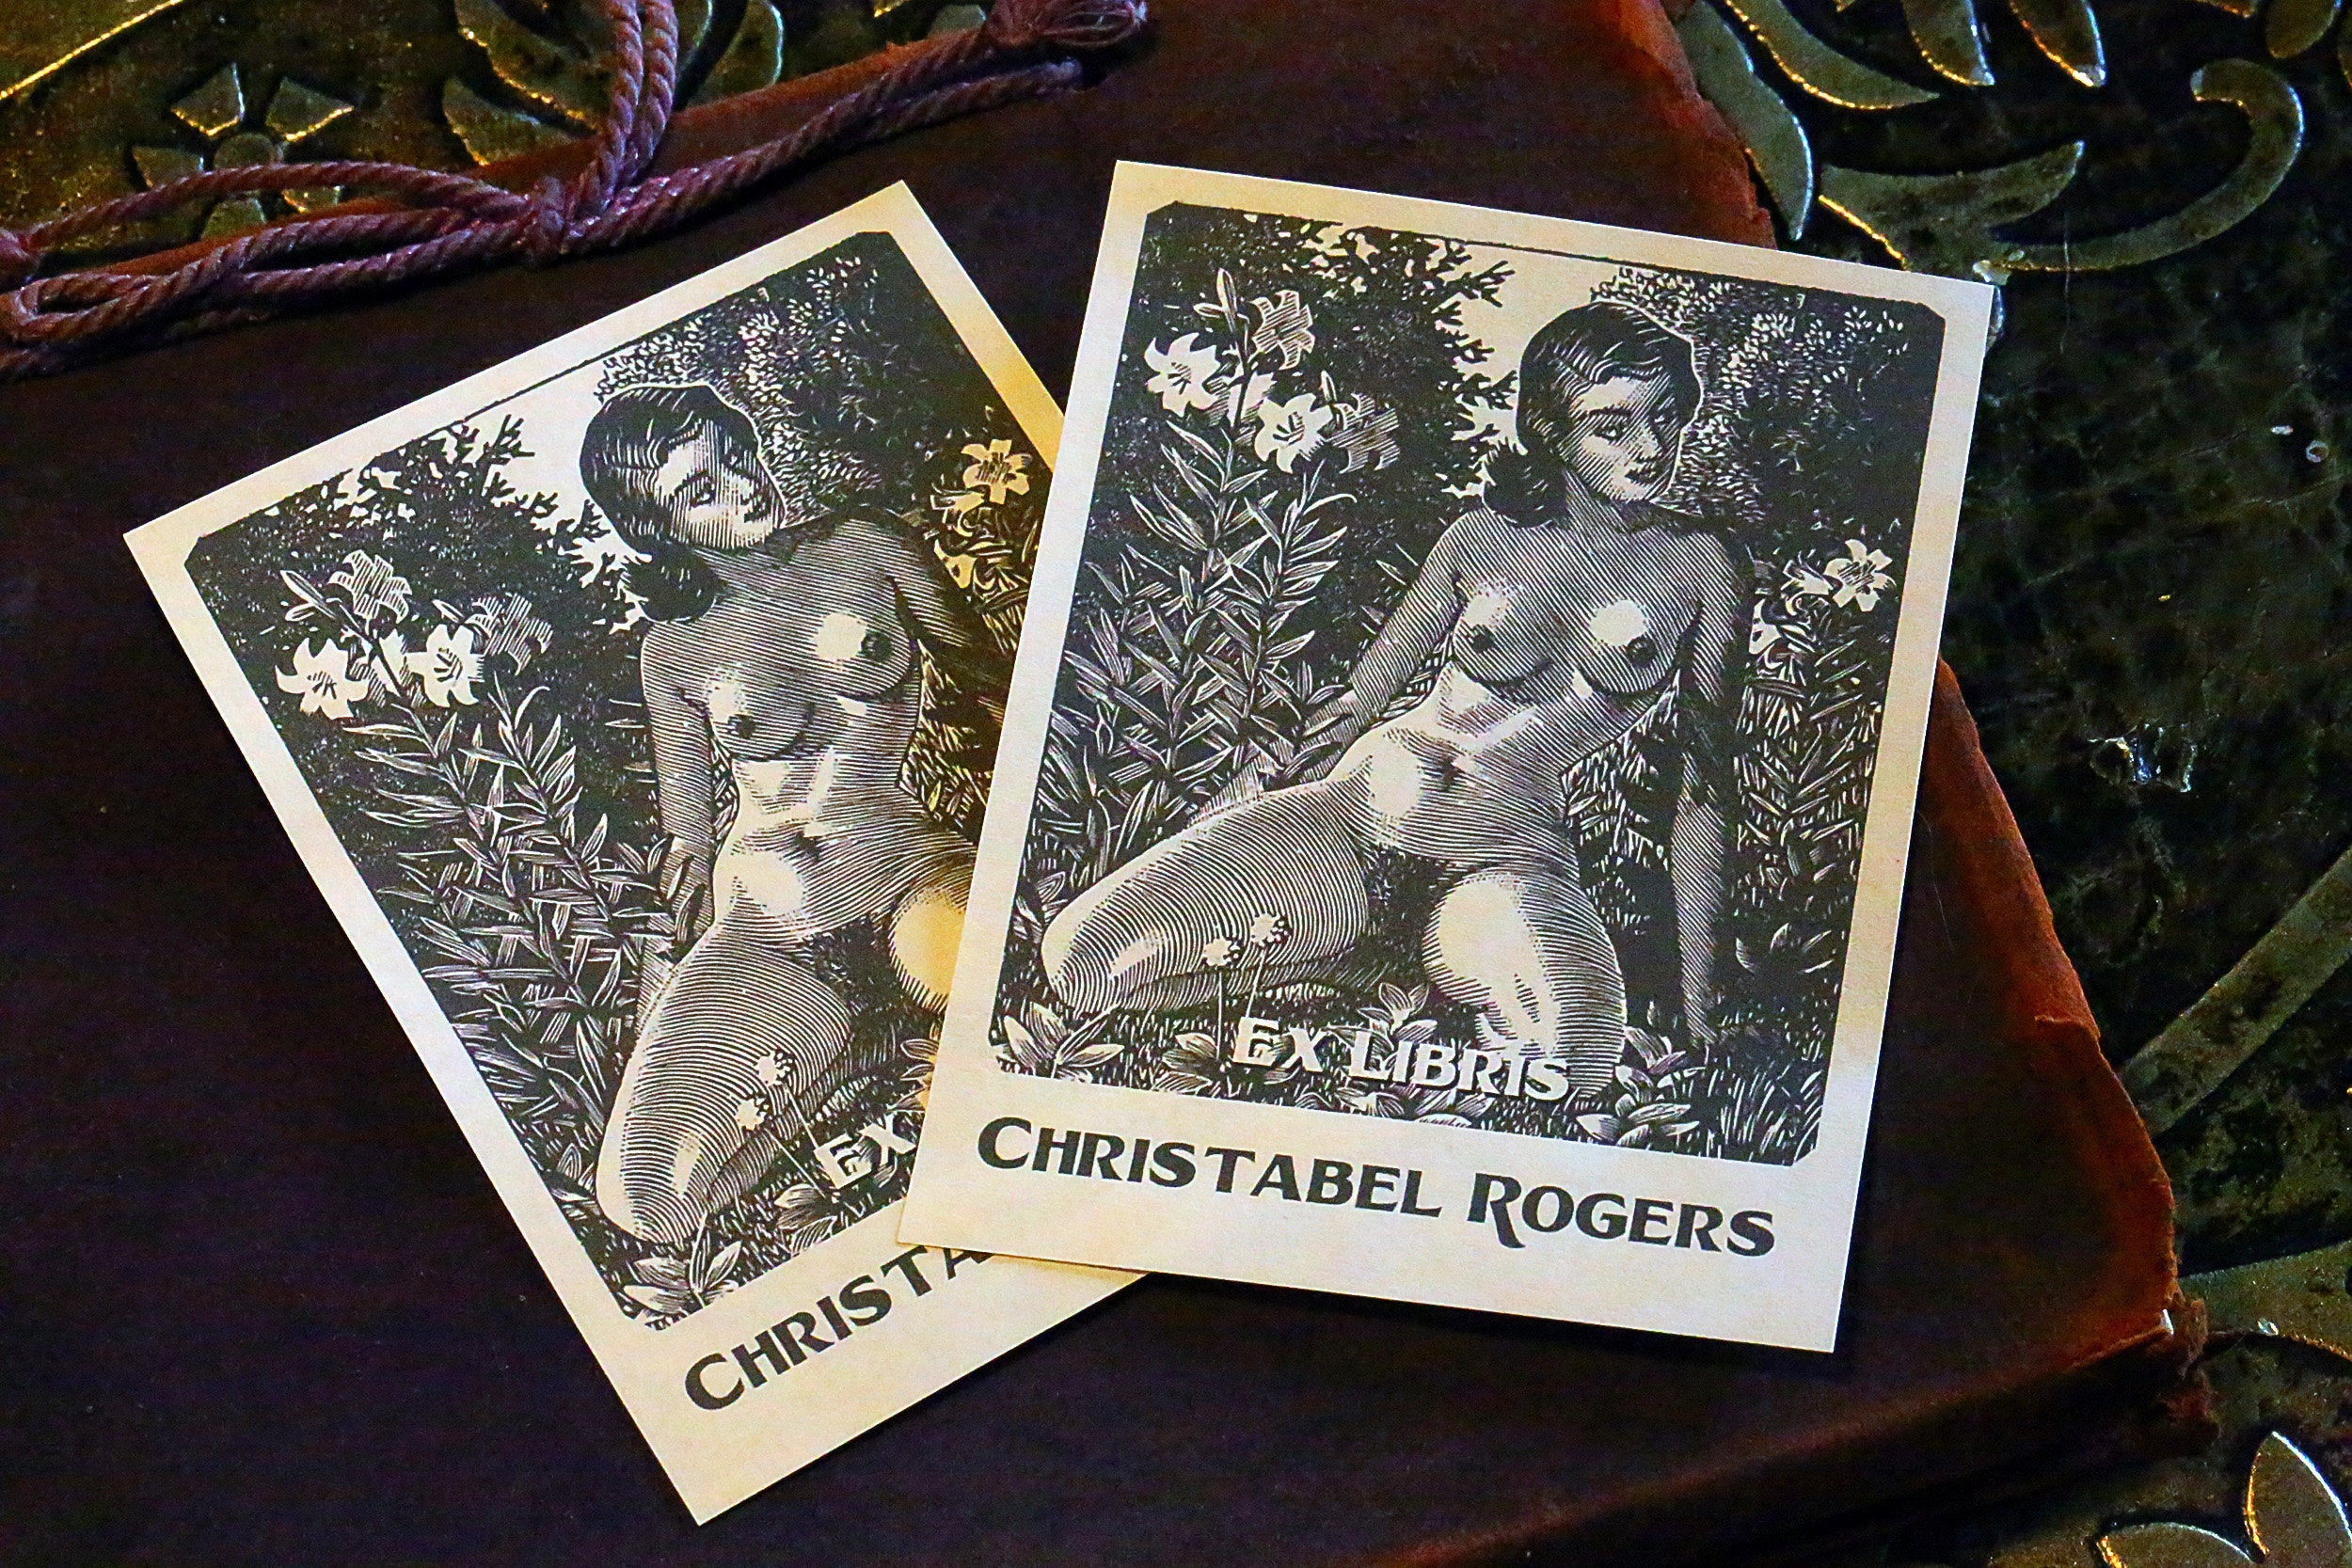 Sunning Beauty, Personalized Erotic Ex-Libris Bookplates, Crafted on Traditional Gummed Paper, 3in x 4in, Set of 30